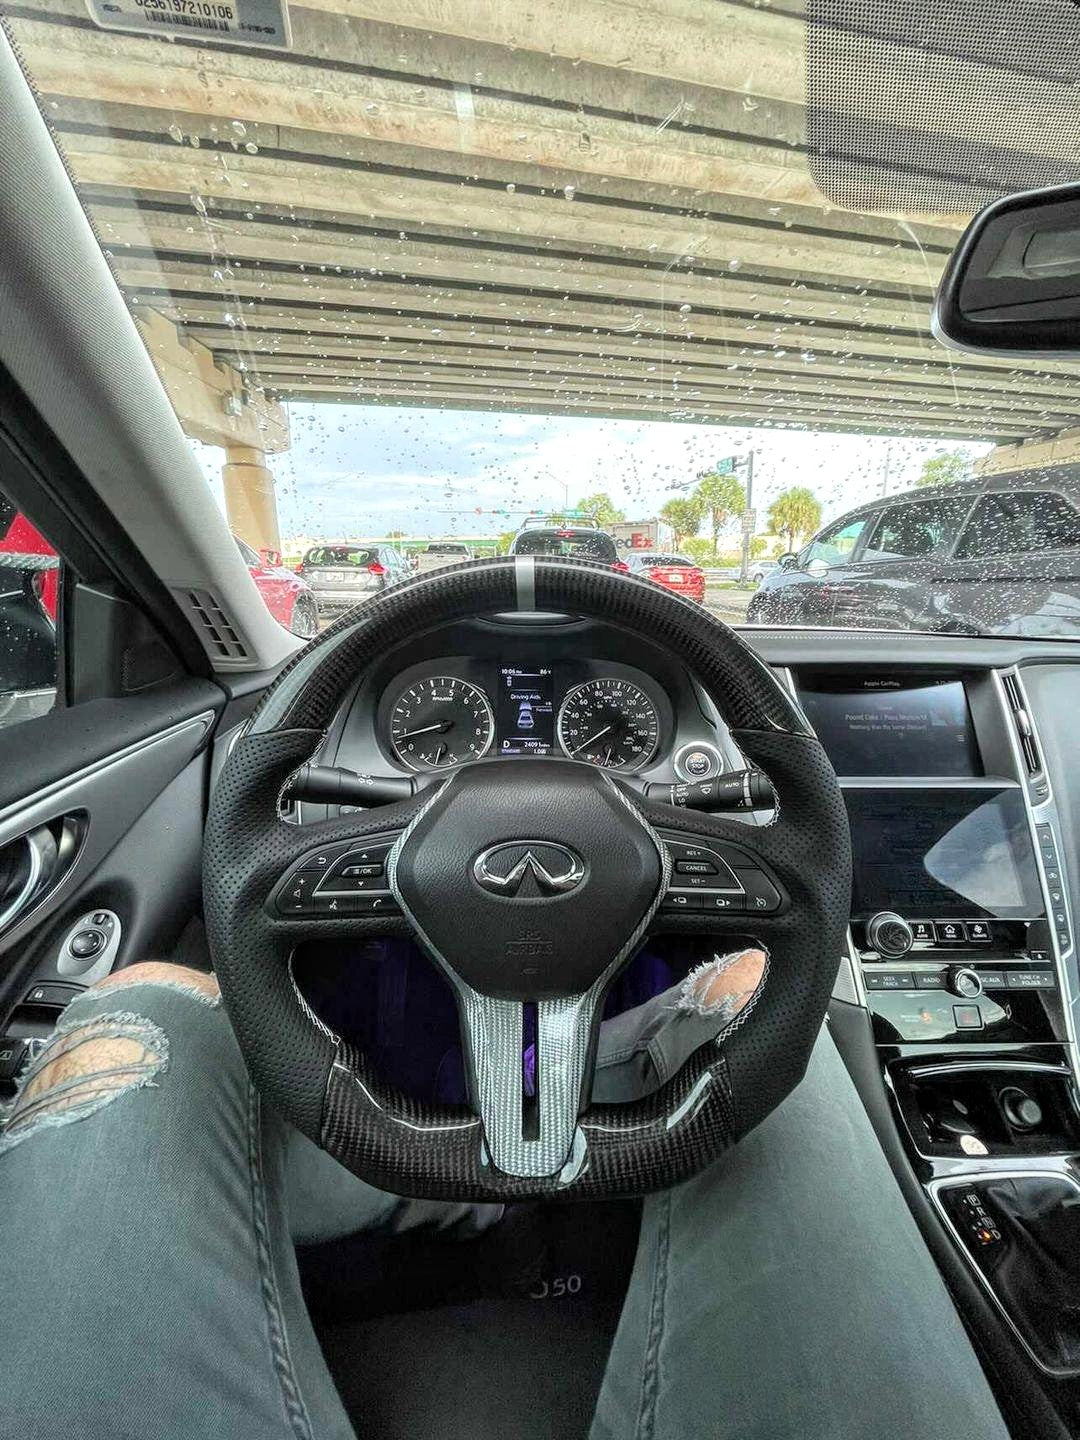 Jalisco's carbon fiber steering wheel with light gray accent, white stripe, and leather grip for Infiniti Q50/Q60